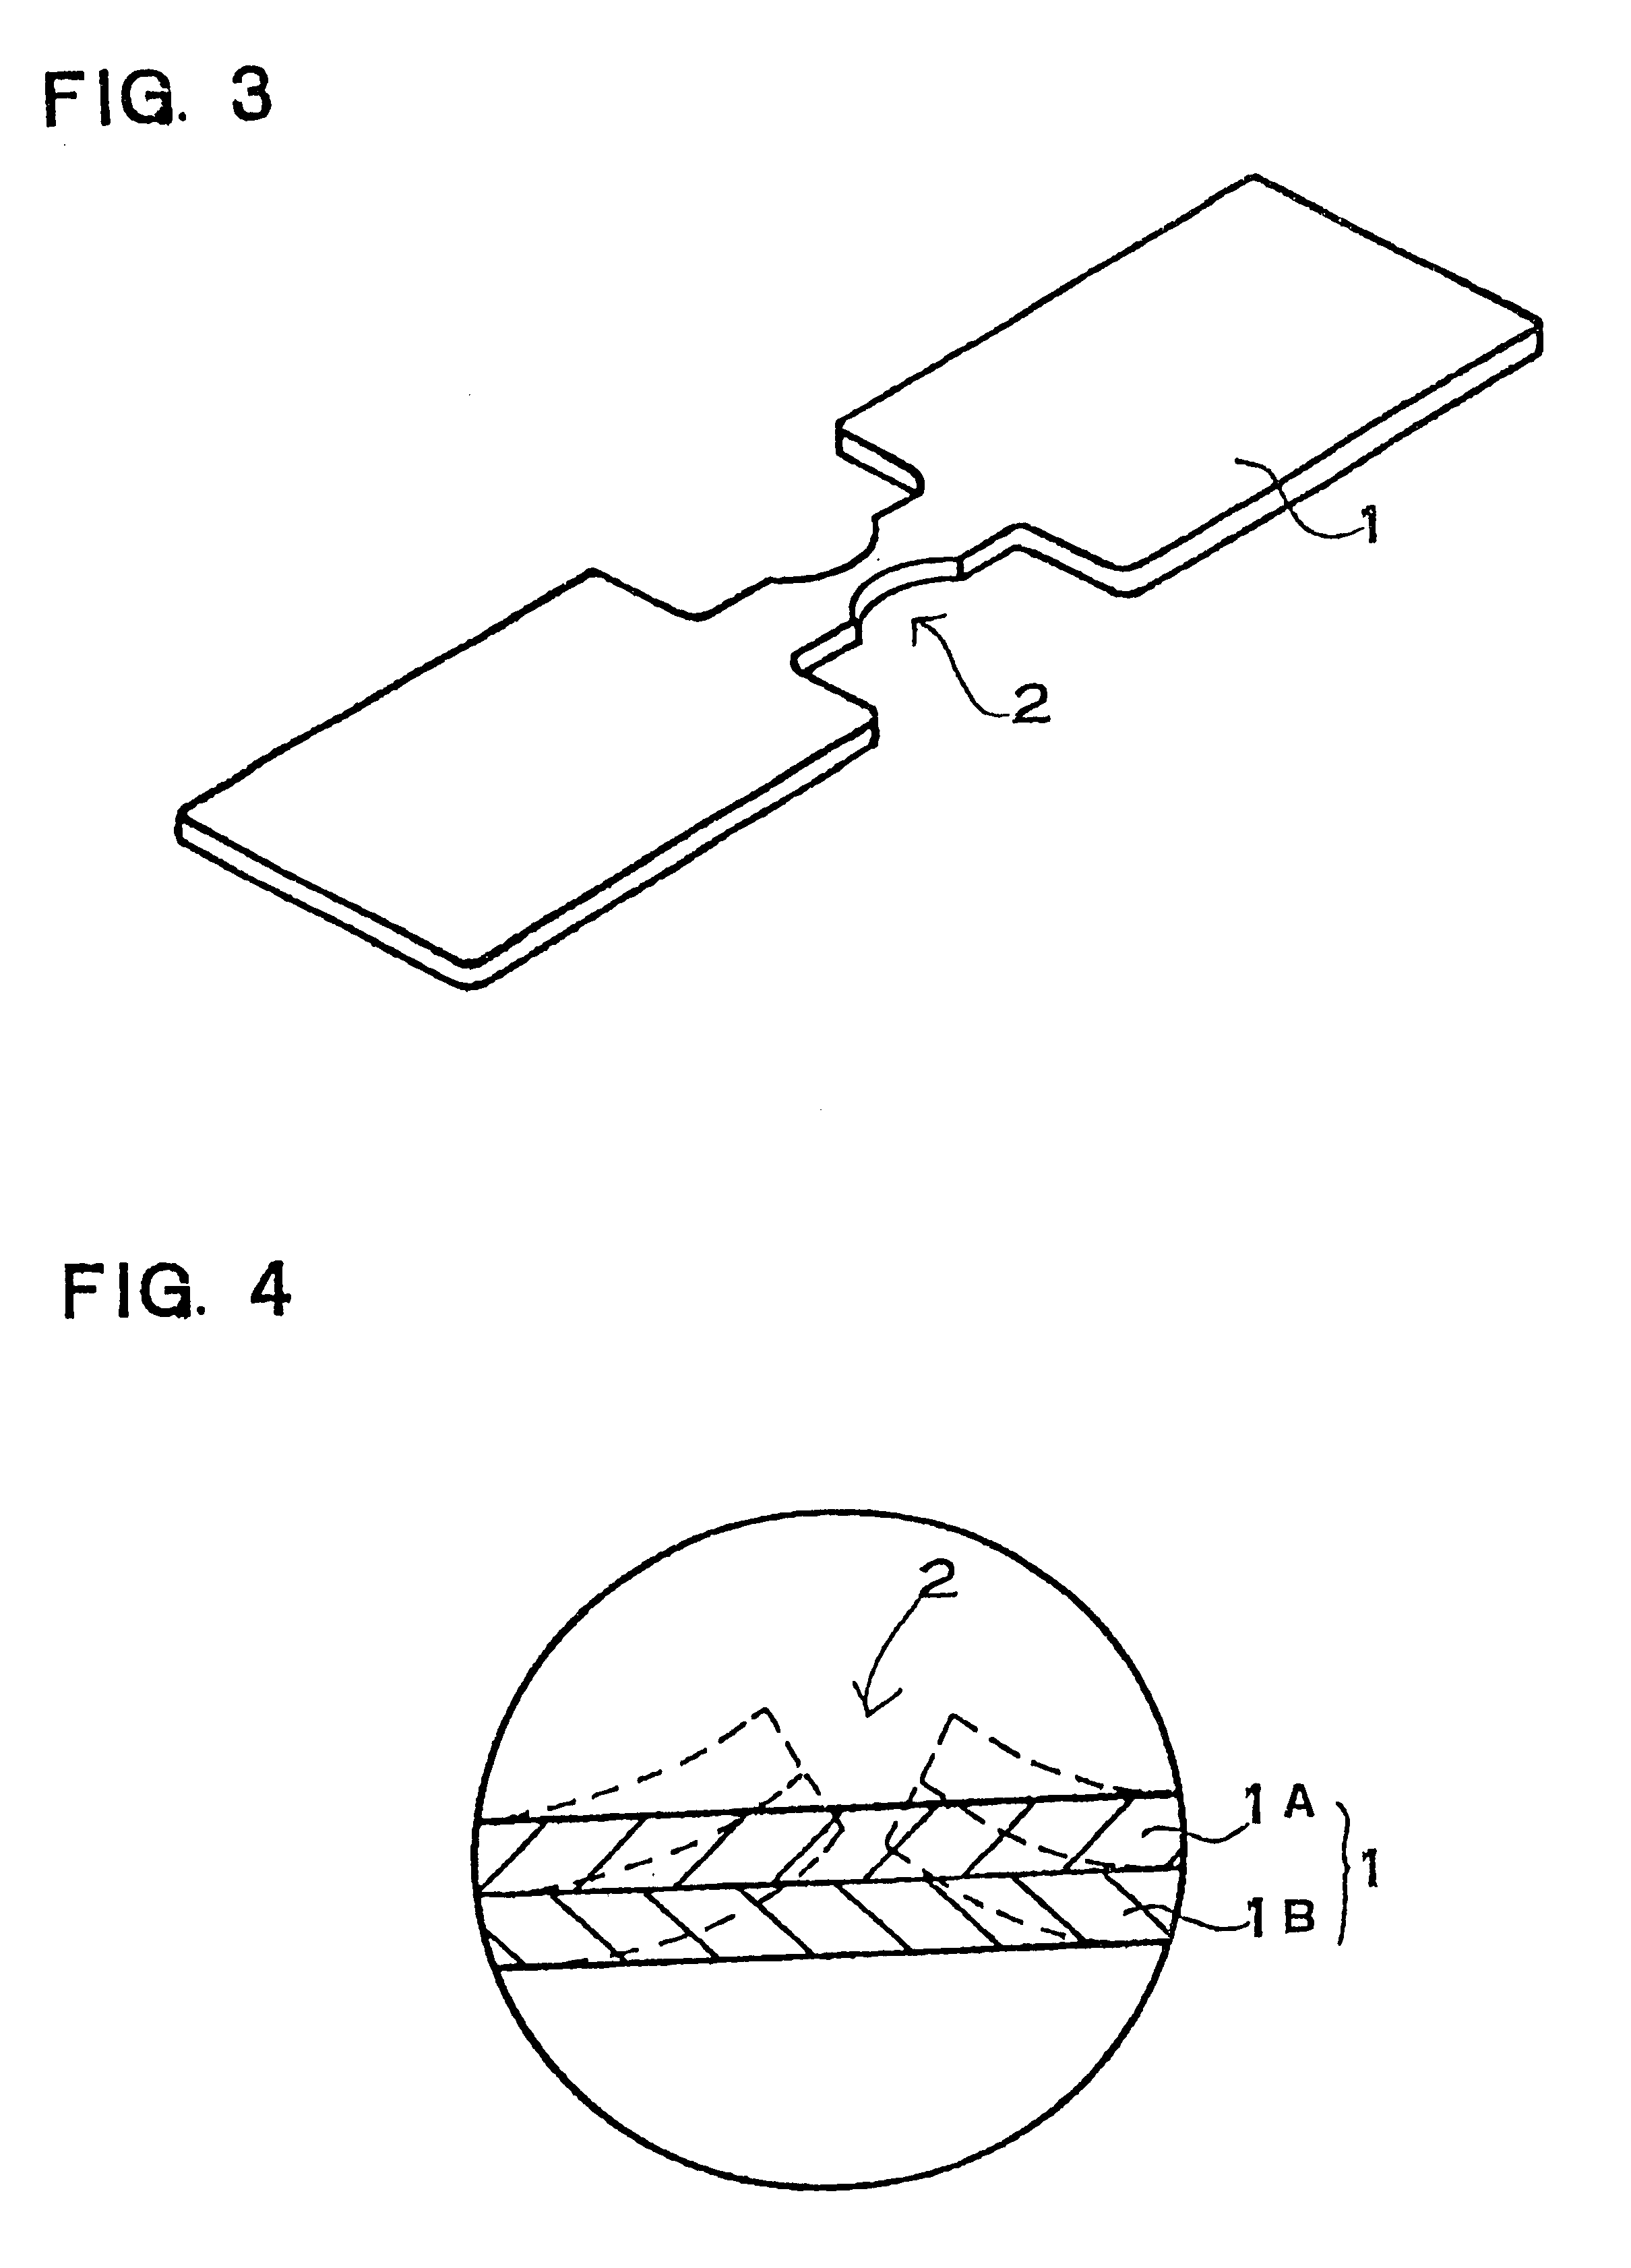 Fuse and battery pack containing the fuse